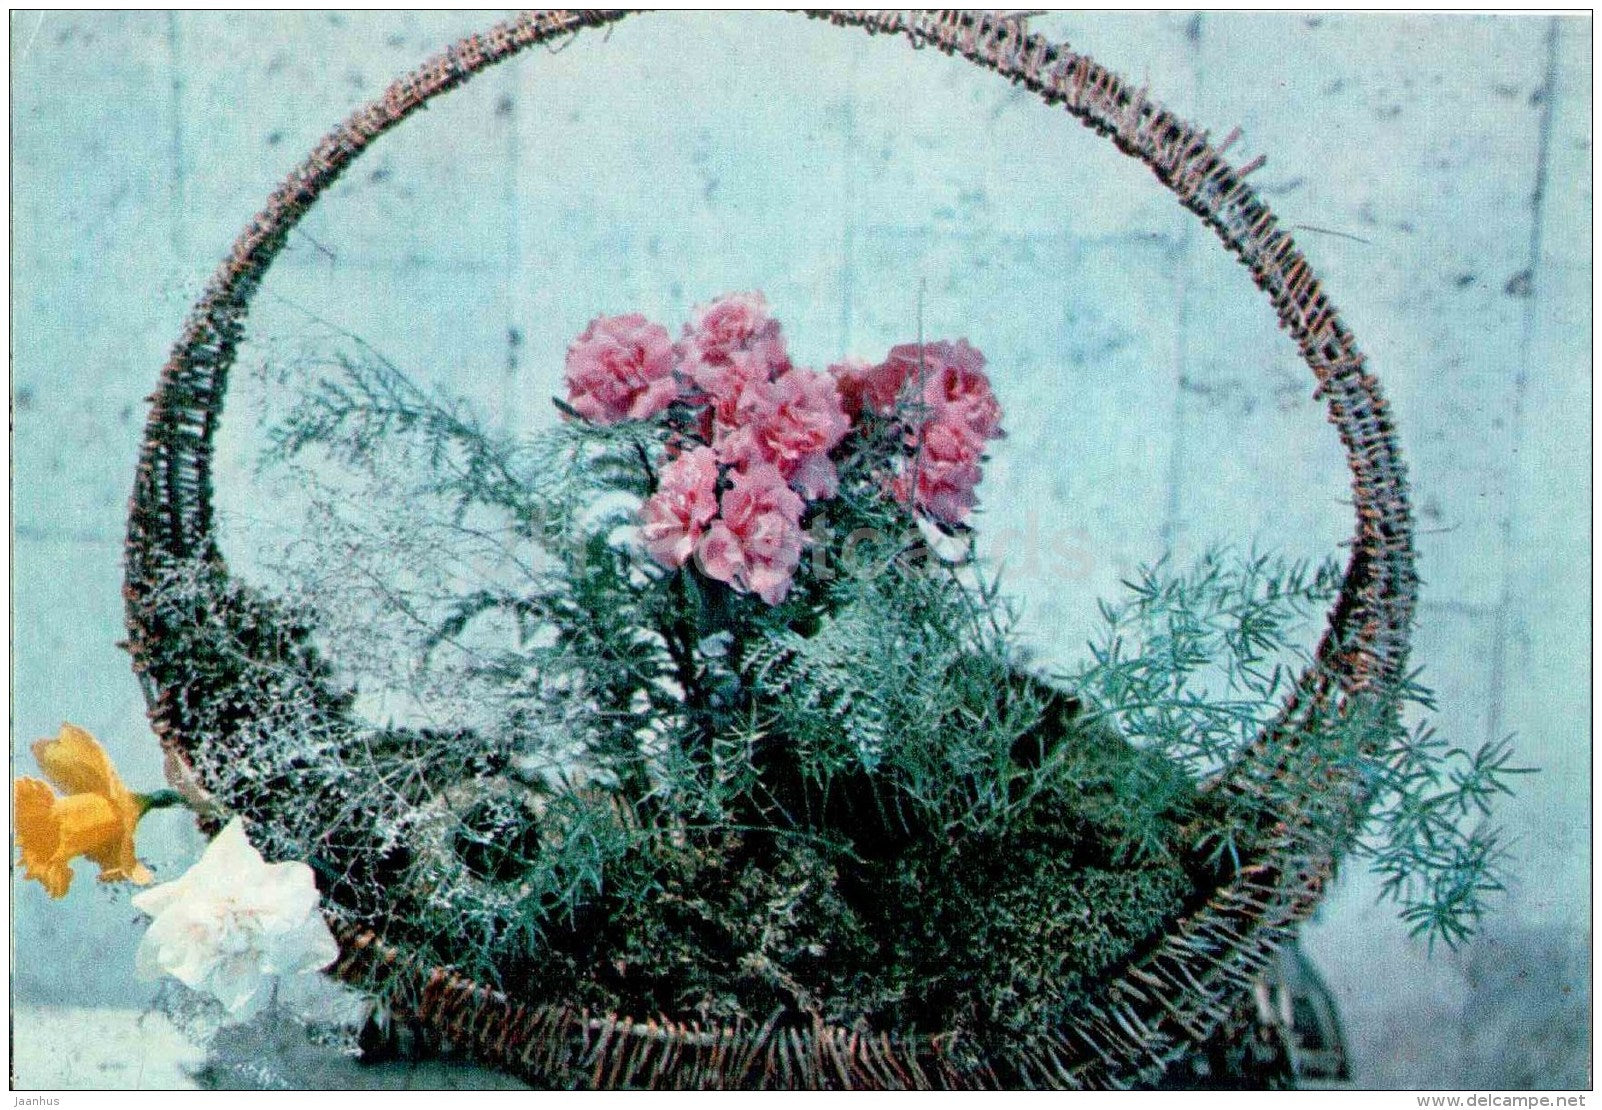 flowers in a wicker basket - flowers - floriculture and gardening pavilion - 1976 - Russia USSR - unused - JH Postcards